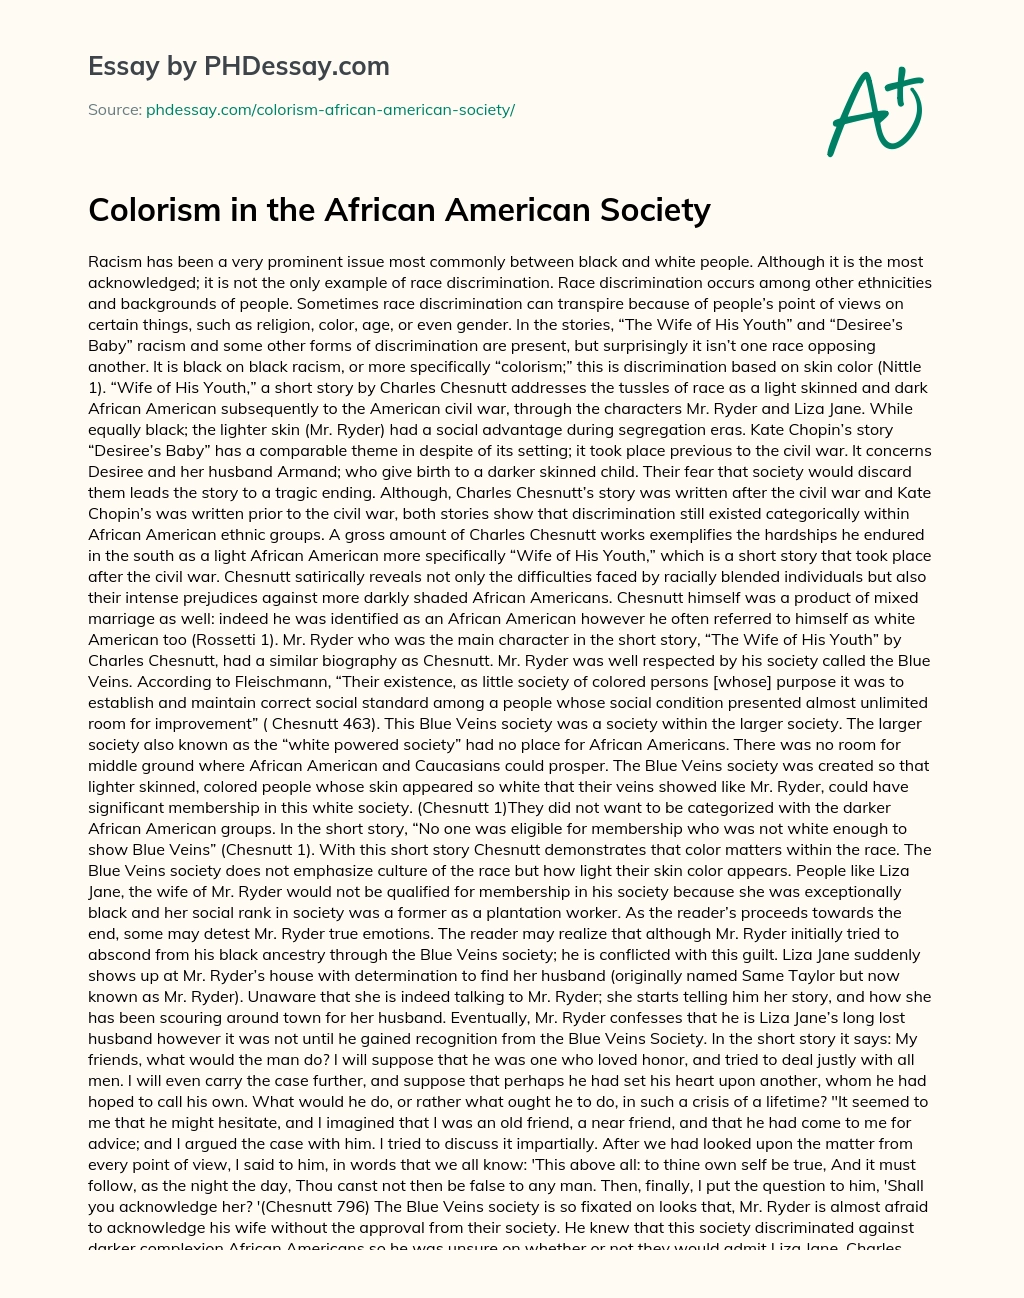 Colorism in the African American Society essay